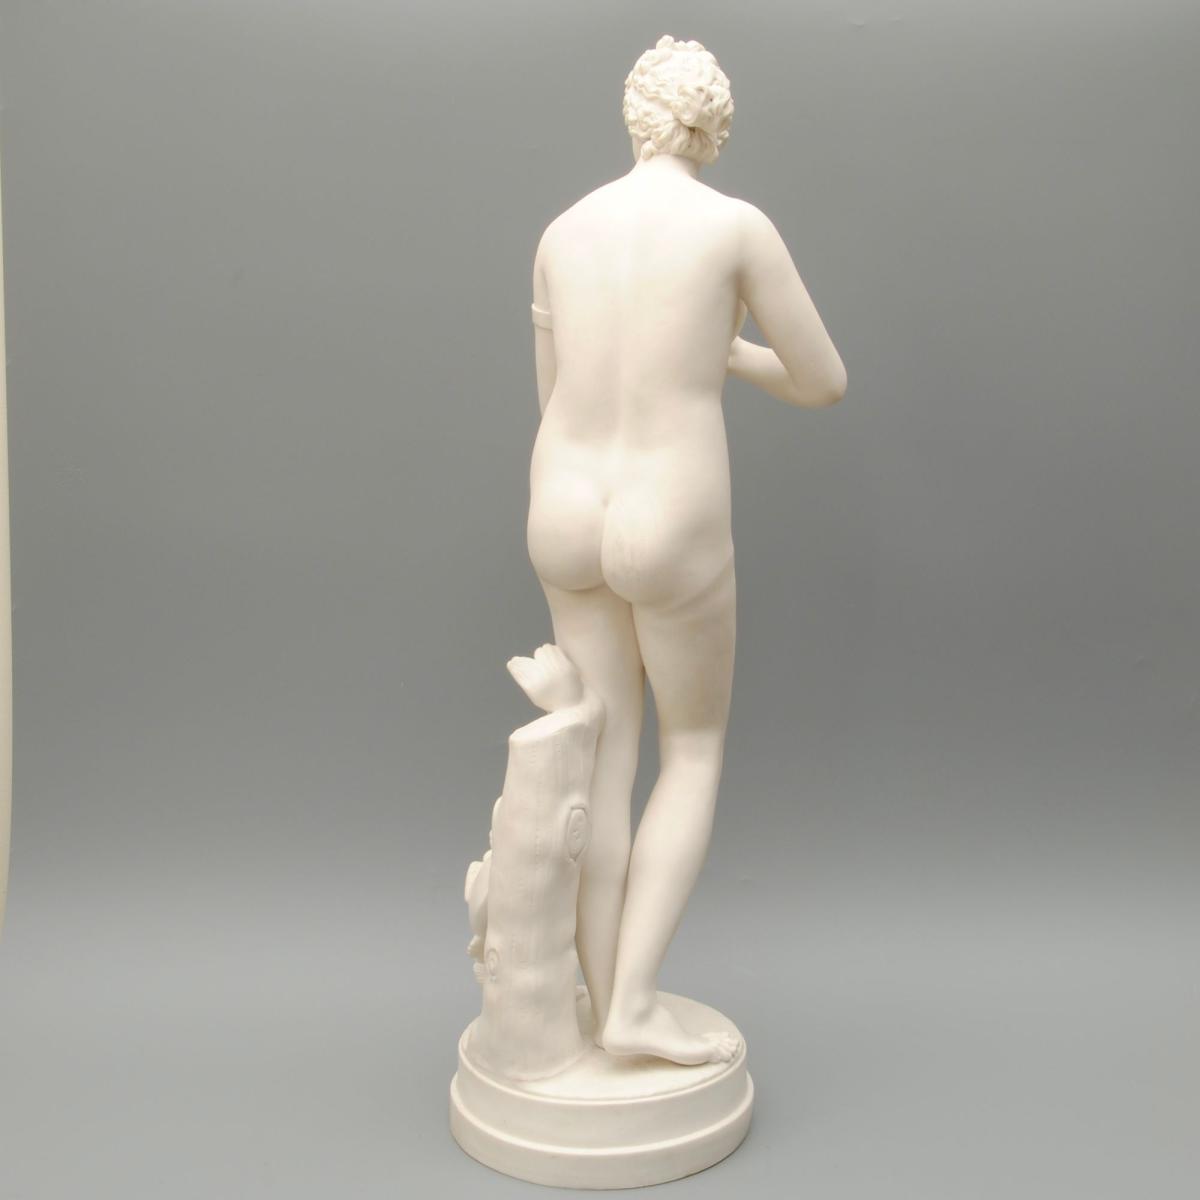 A Large Mid-19th Century Parian Figure of Diana